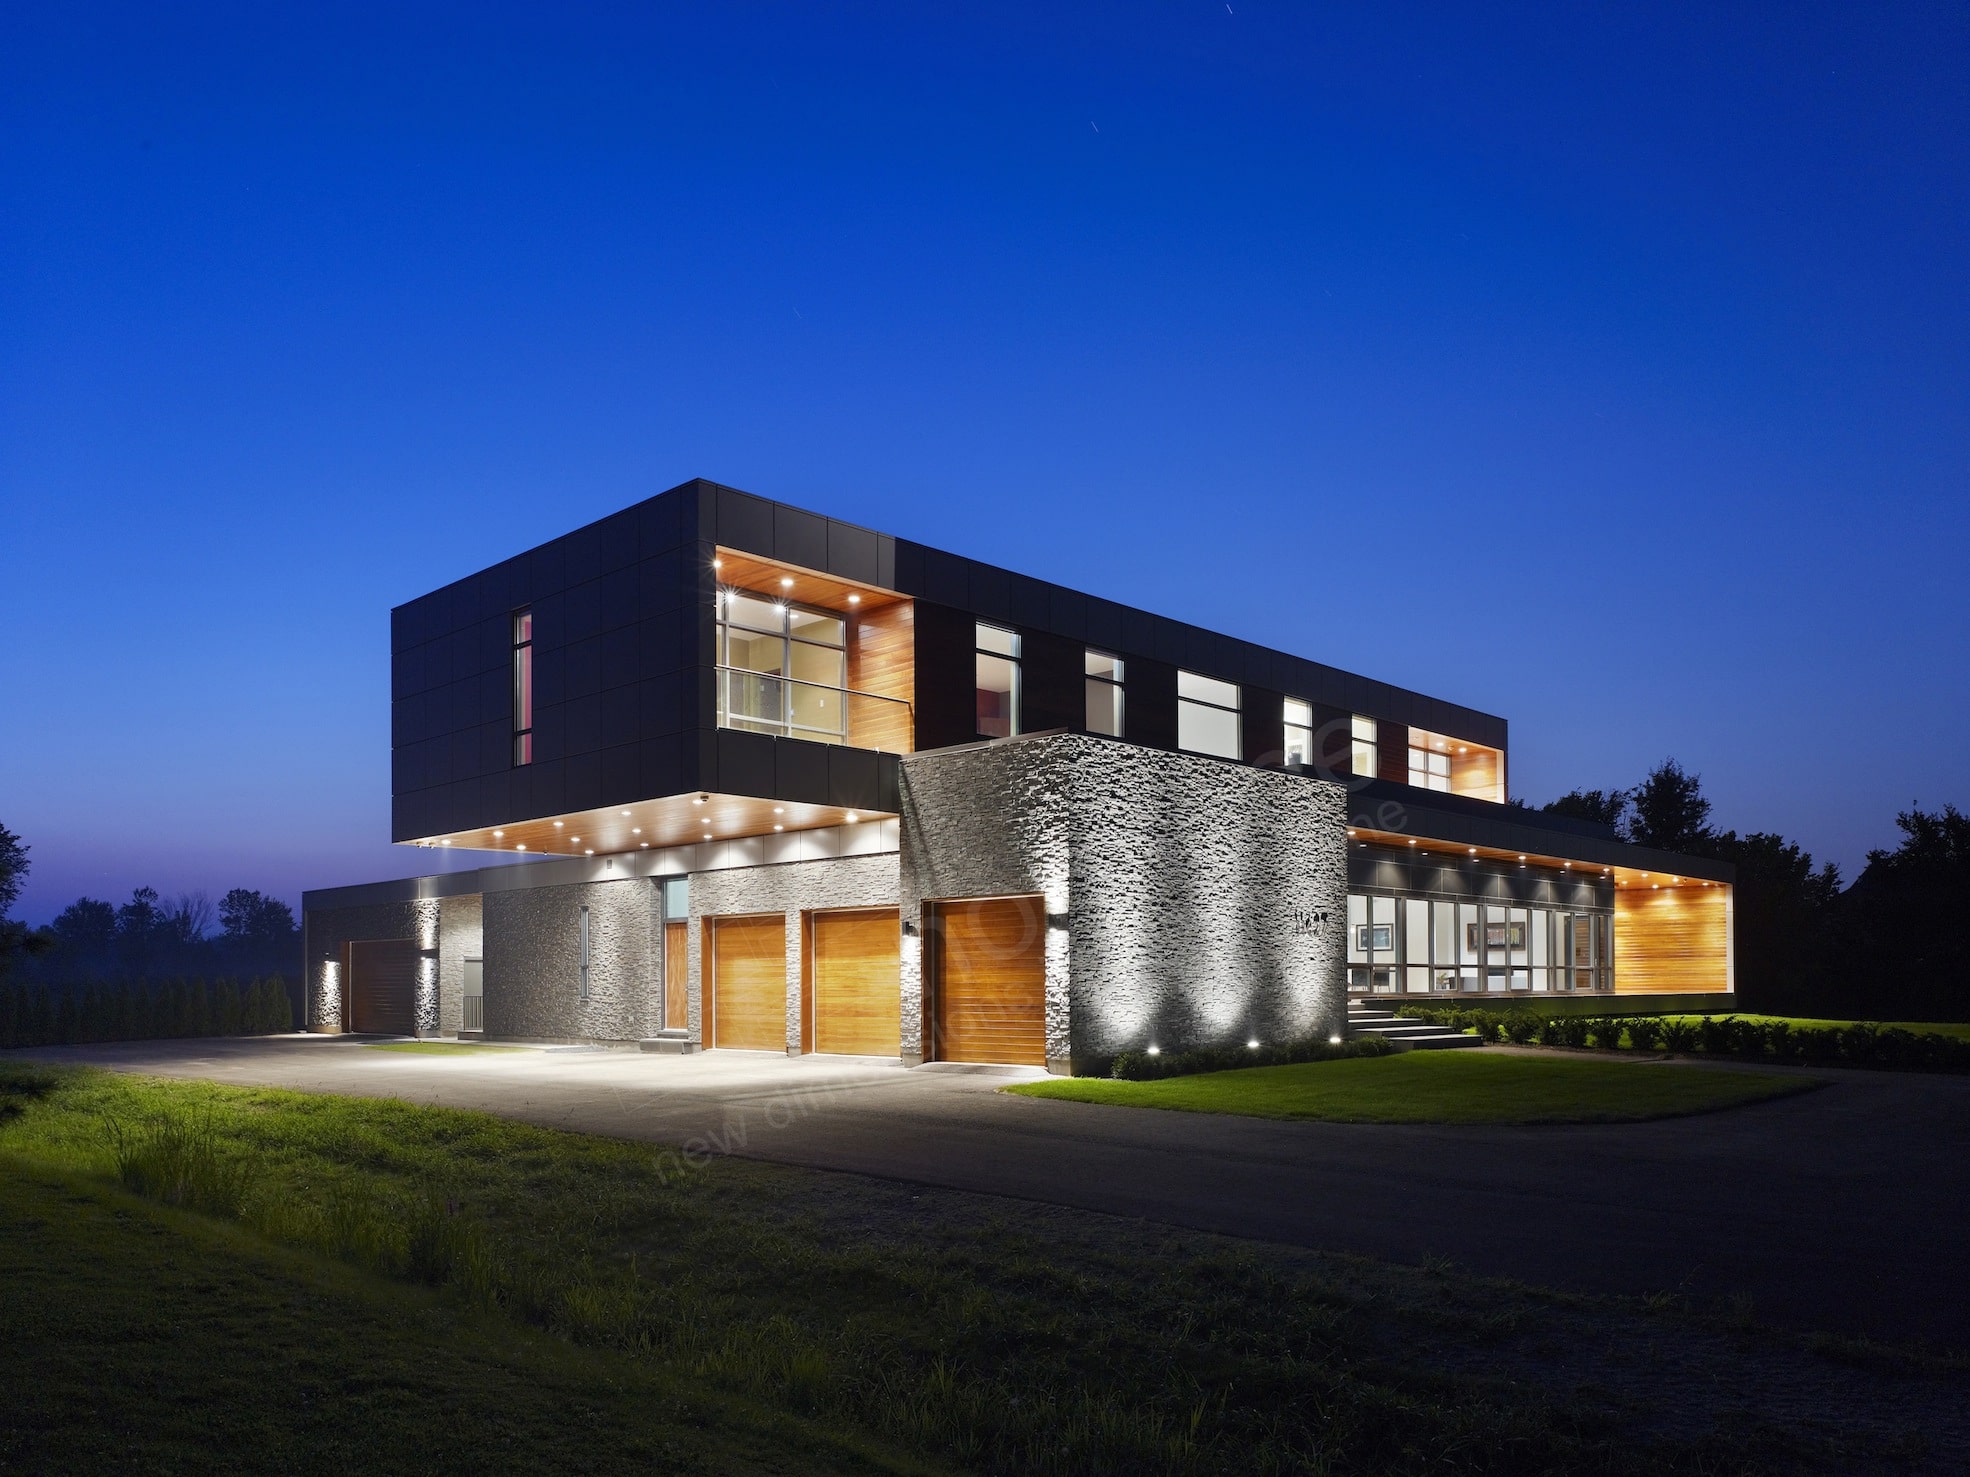 Norstone Charcoal Rock Panels used on exterior facade of ultra modern home in Niagra Falls Ontario